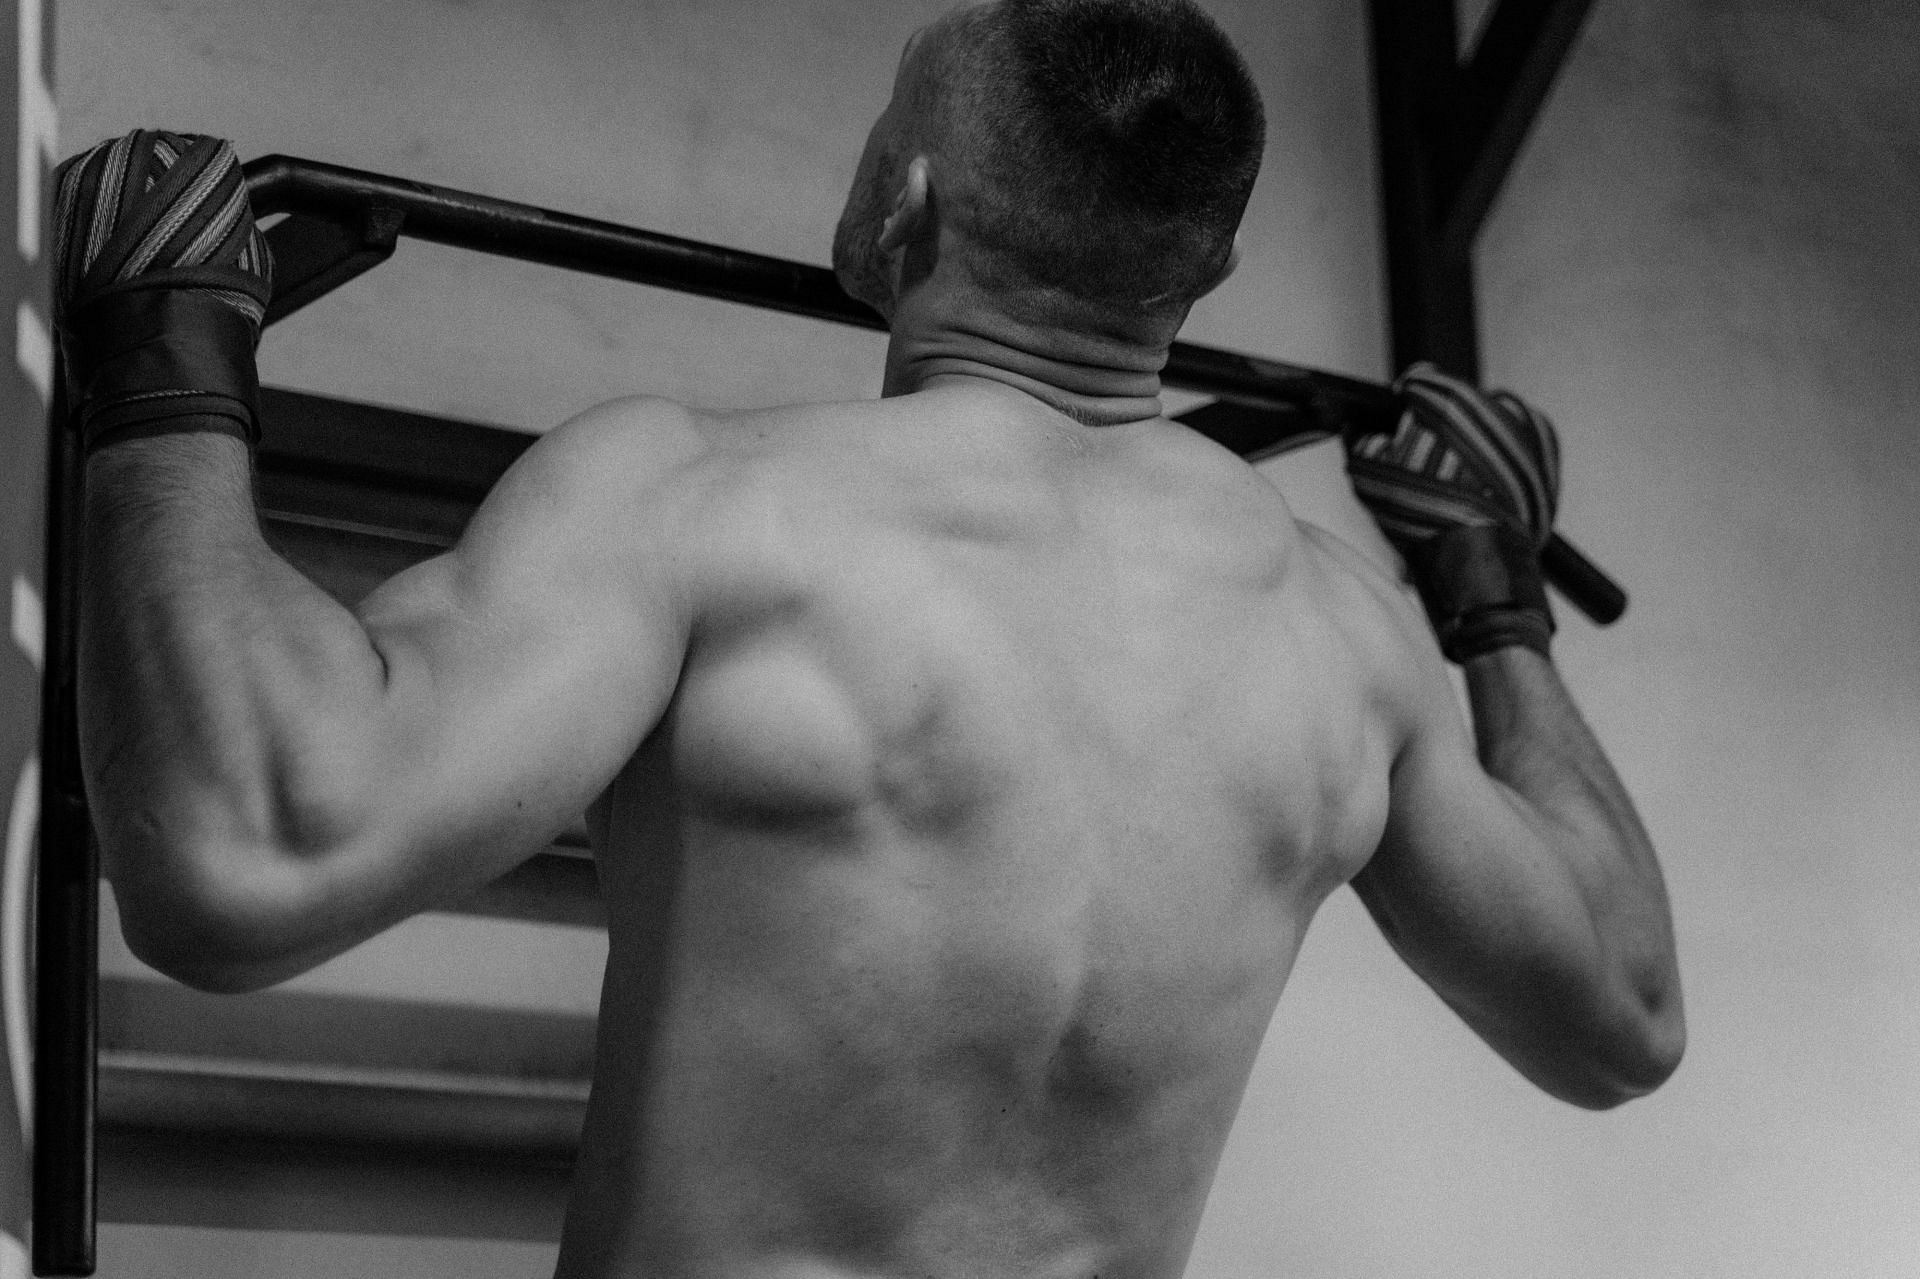 Chin-up alternatives that you can do effectively! (Image via Pexels/Tima Miroshnichencko)